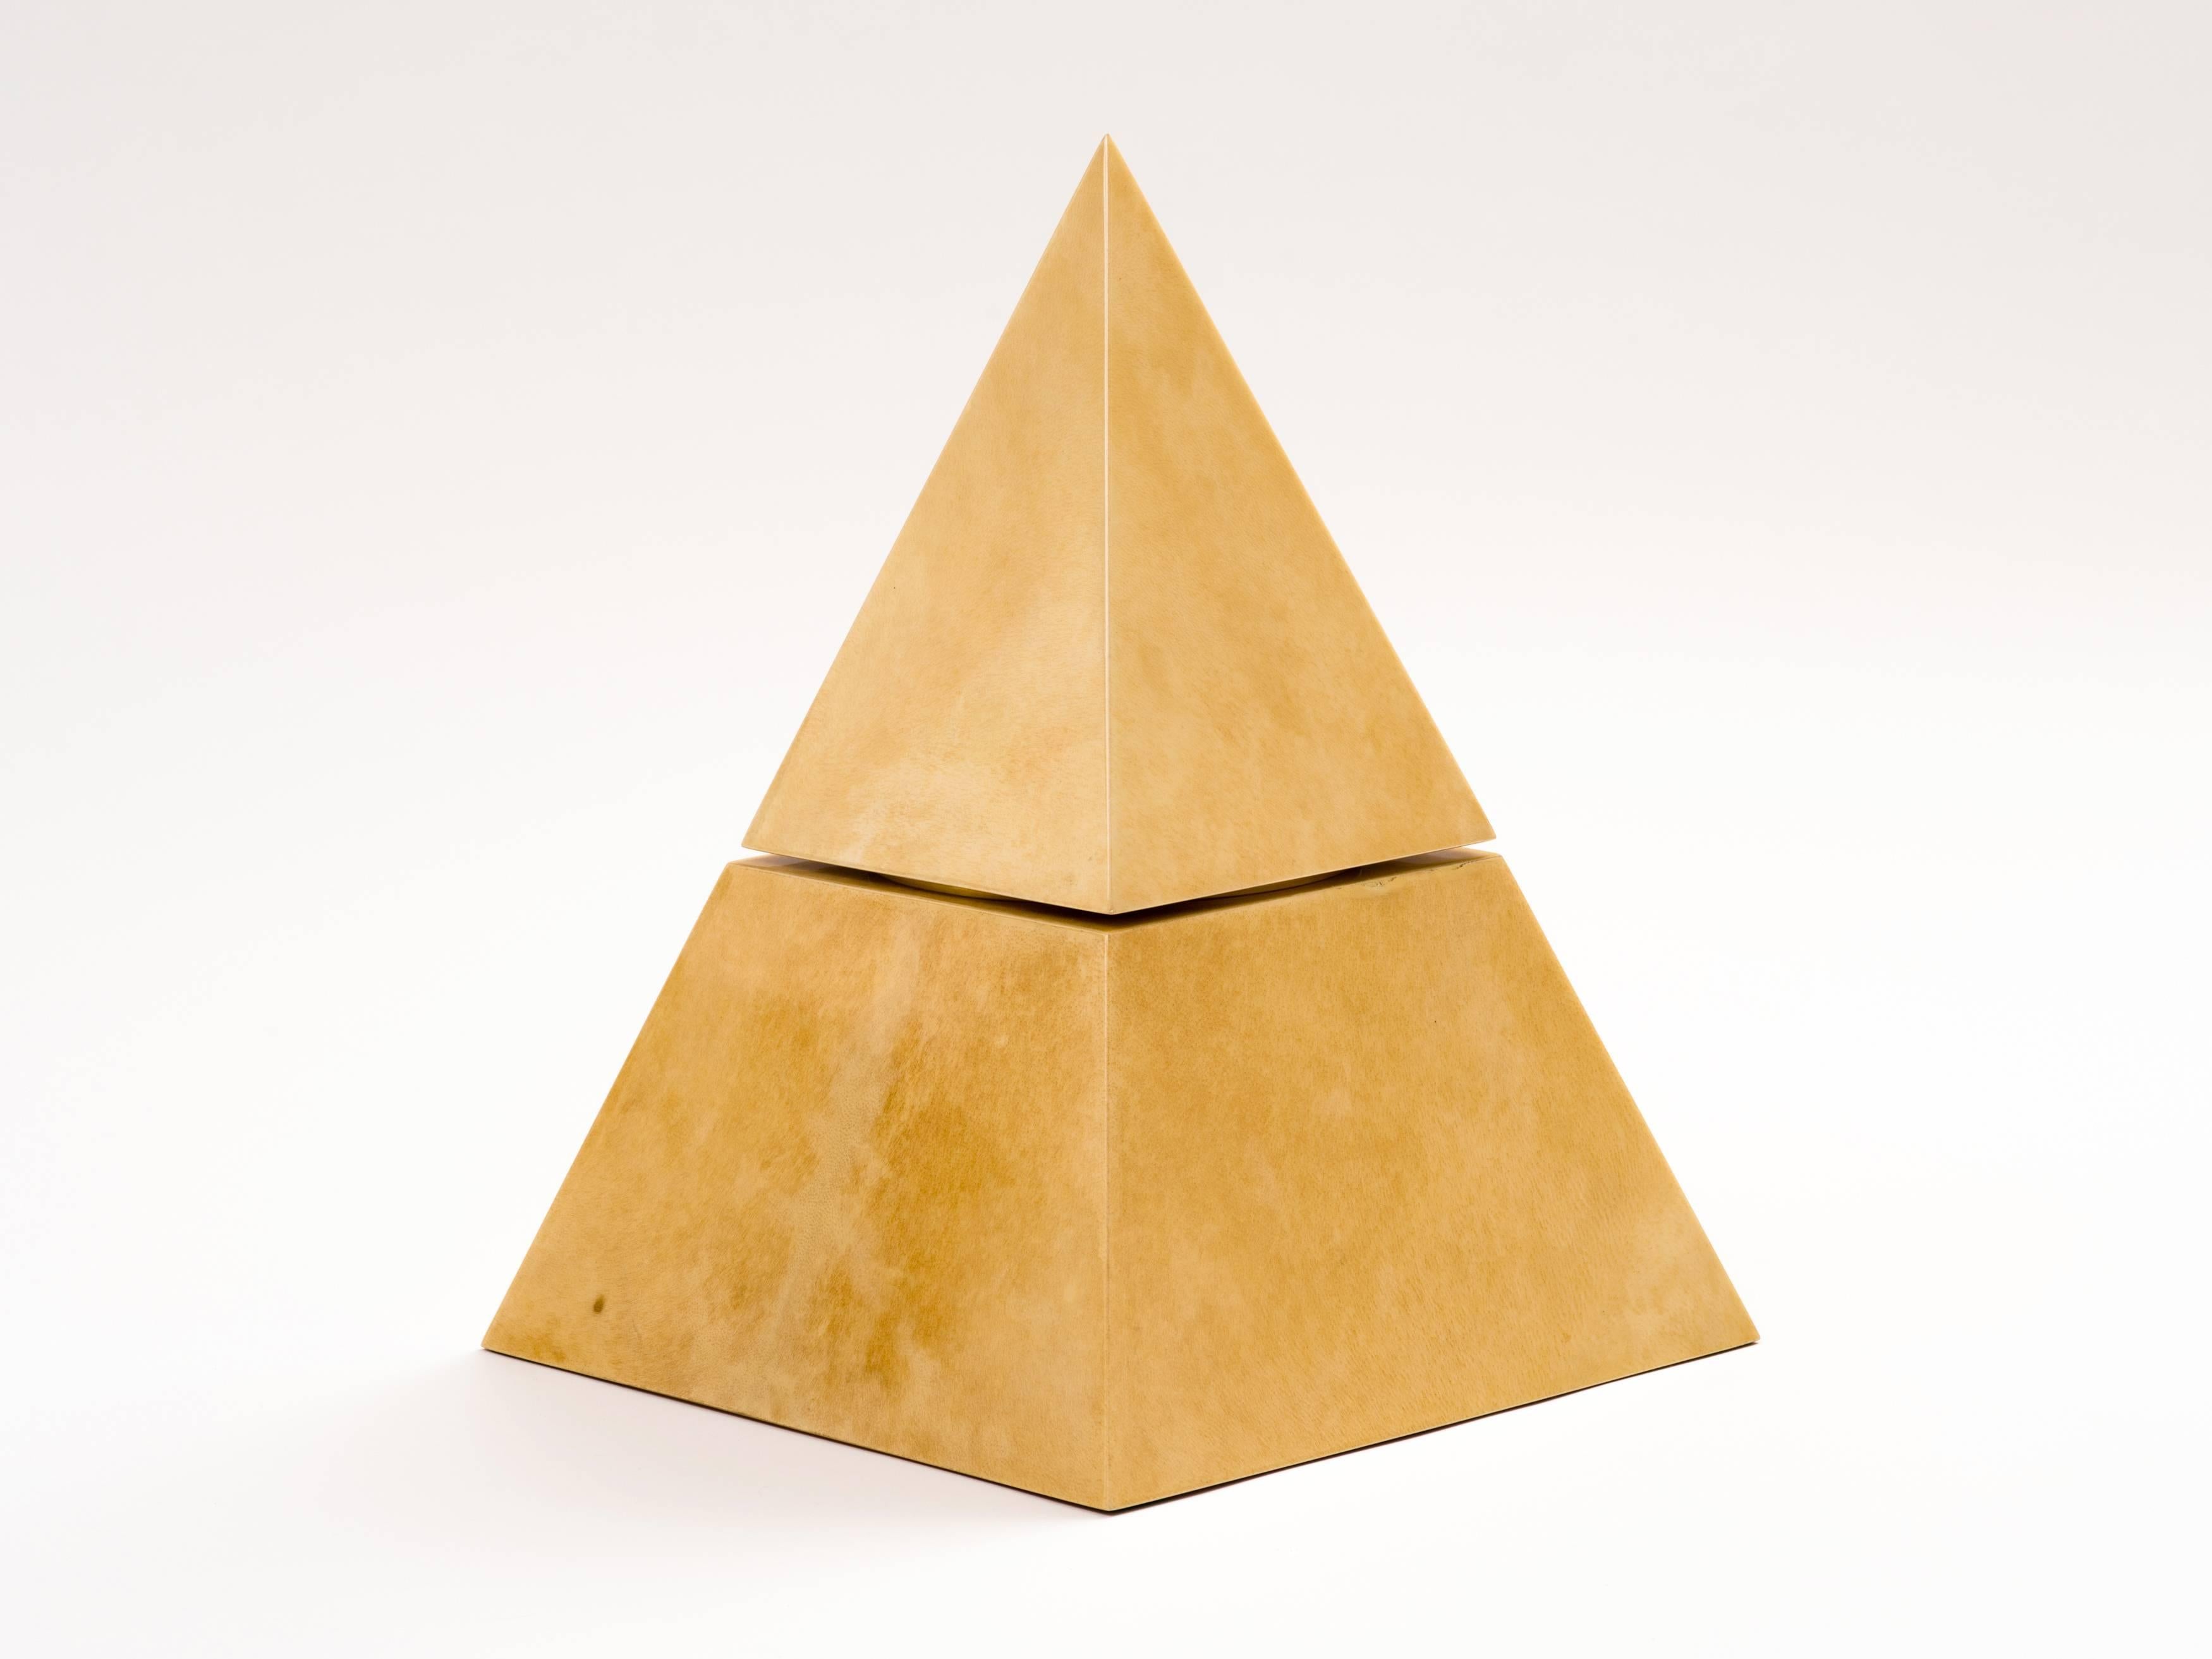 An exceptional example of an uncommon Aldo Tura design, this pyramid form wine cooler or ice bucket comprises a lacquered goatskin parchment body with a lacquered mahogany underside, inset with a plastic receptacle. The goatskin is a rich cream or